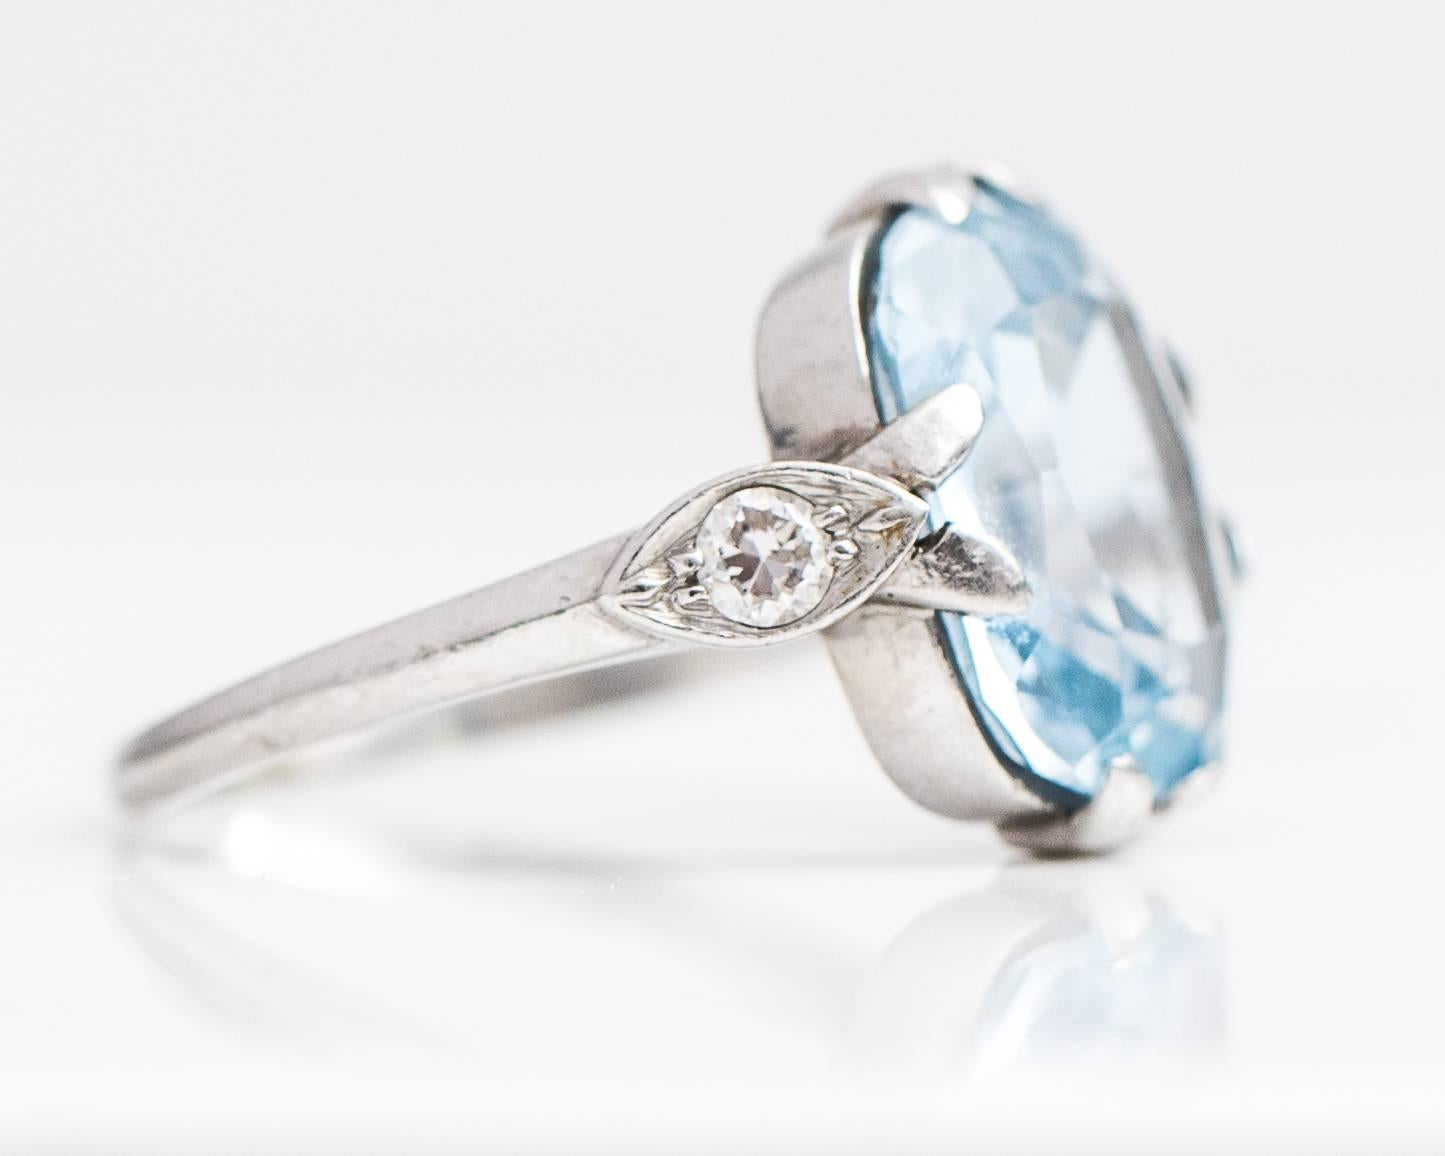 1935 Art Deco 3.5 Carat Aquamarine with .10 carat total weight Old European Cut Diamonds and Platinum Ring. The Old Cushion Cut Aquamarine has a clear Sea-foam Greenish Blue color and measures 13 millimeters long by 9 millimeters wide. The cut is